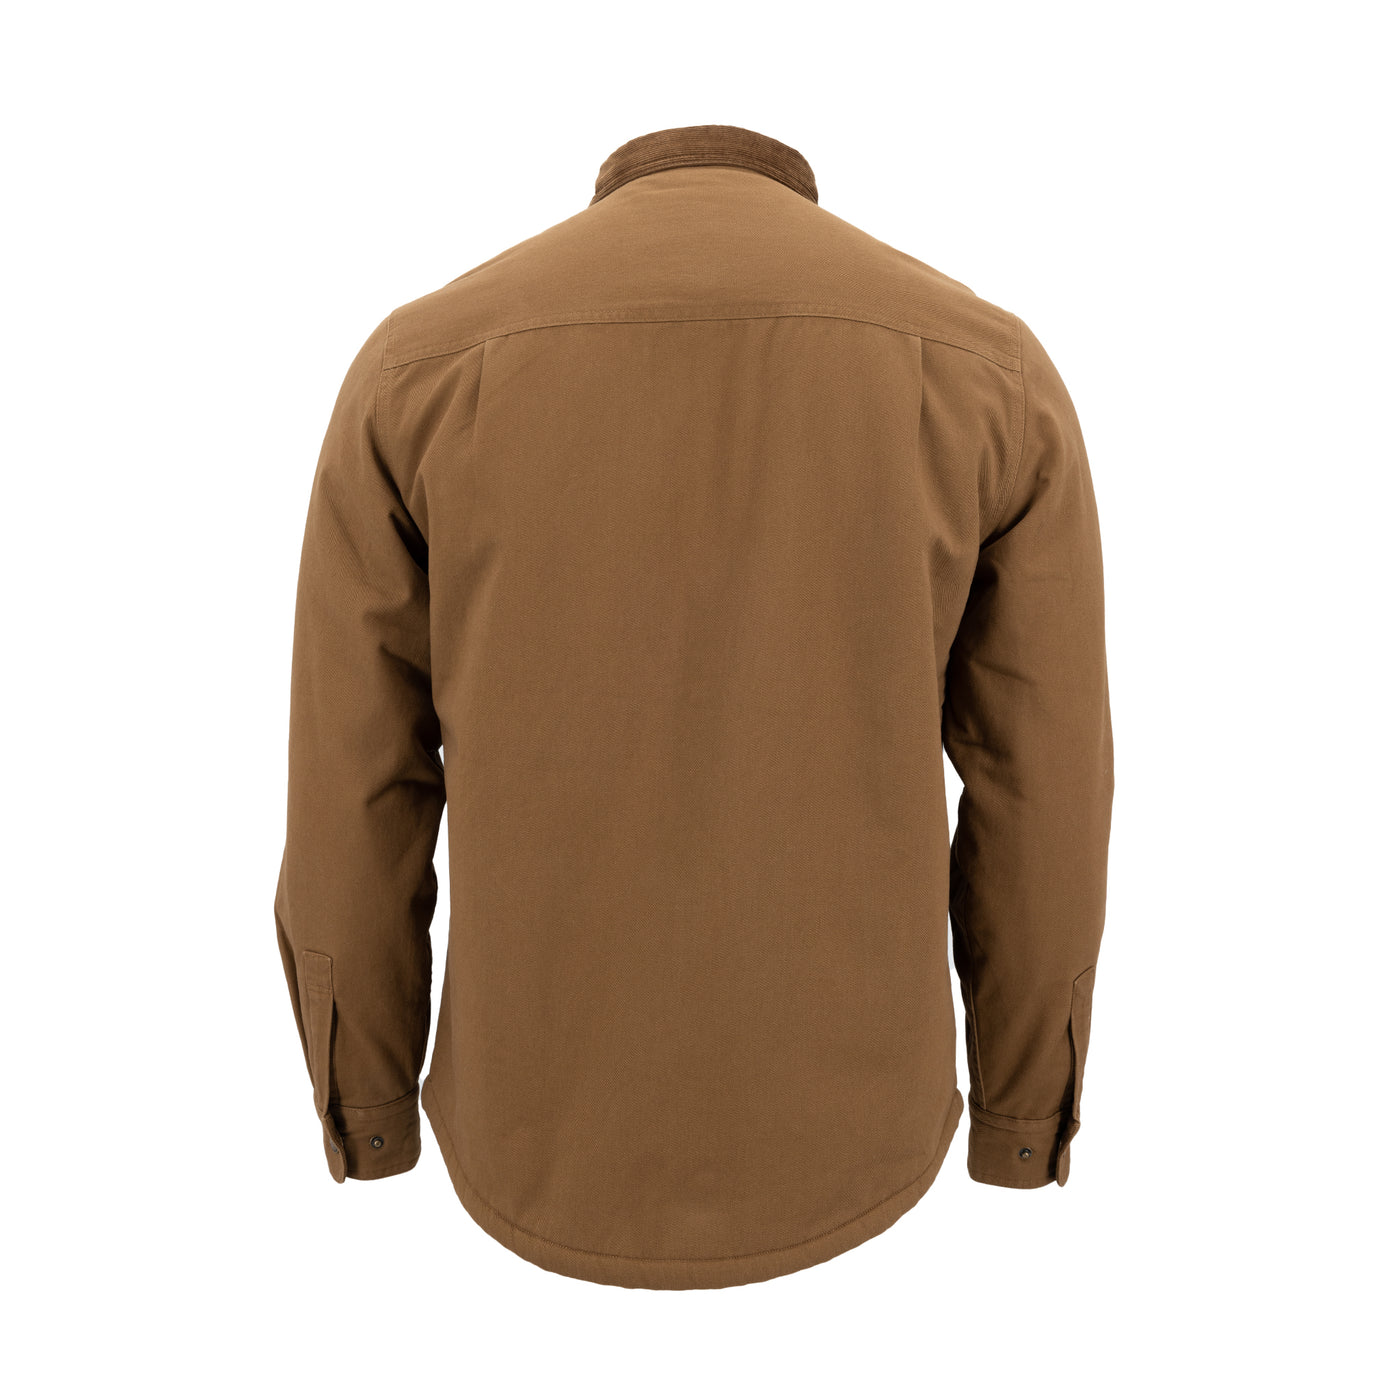 Sherpa Lined Twill Shirt Jacket with Corduroy Collar